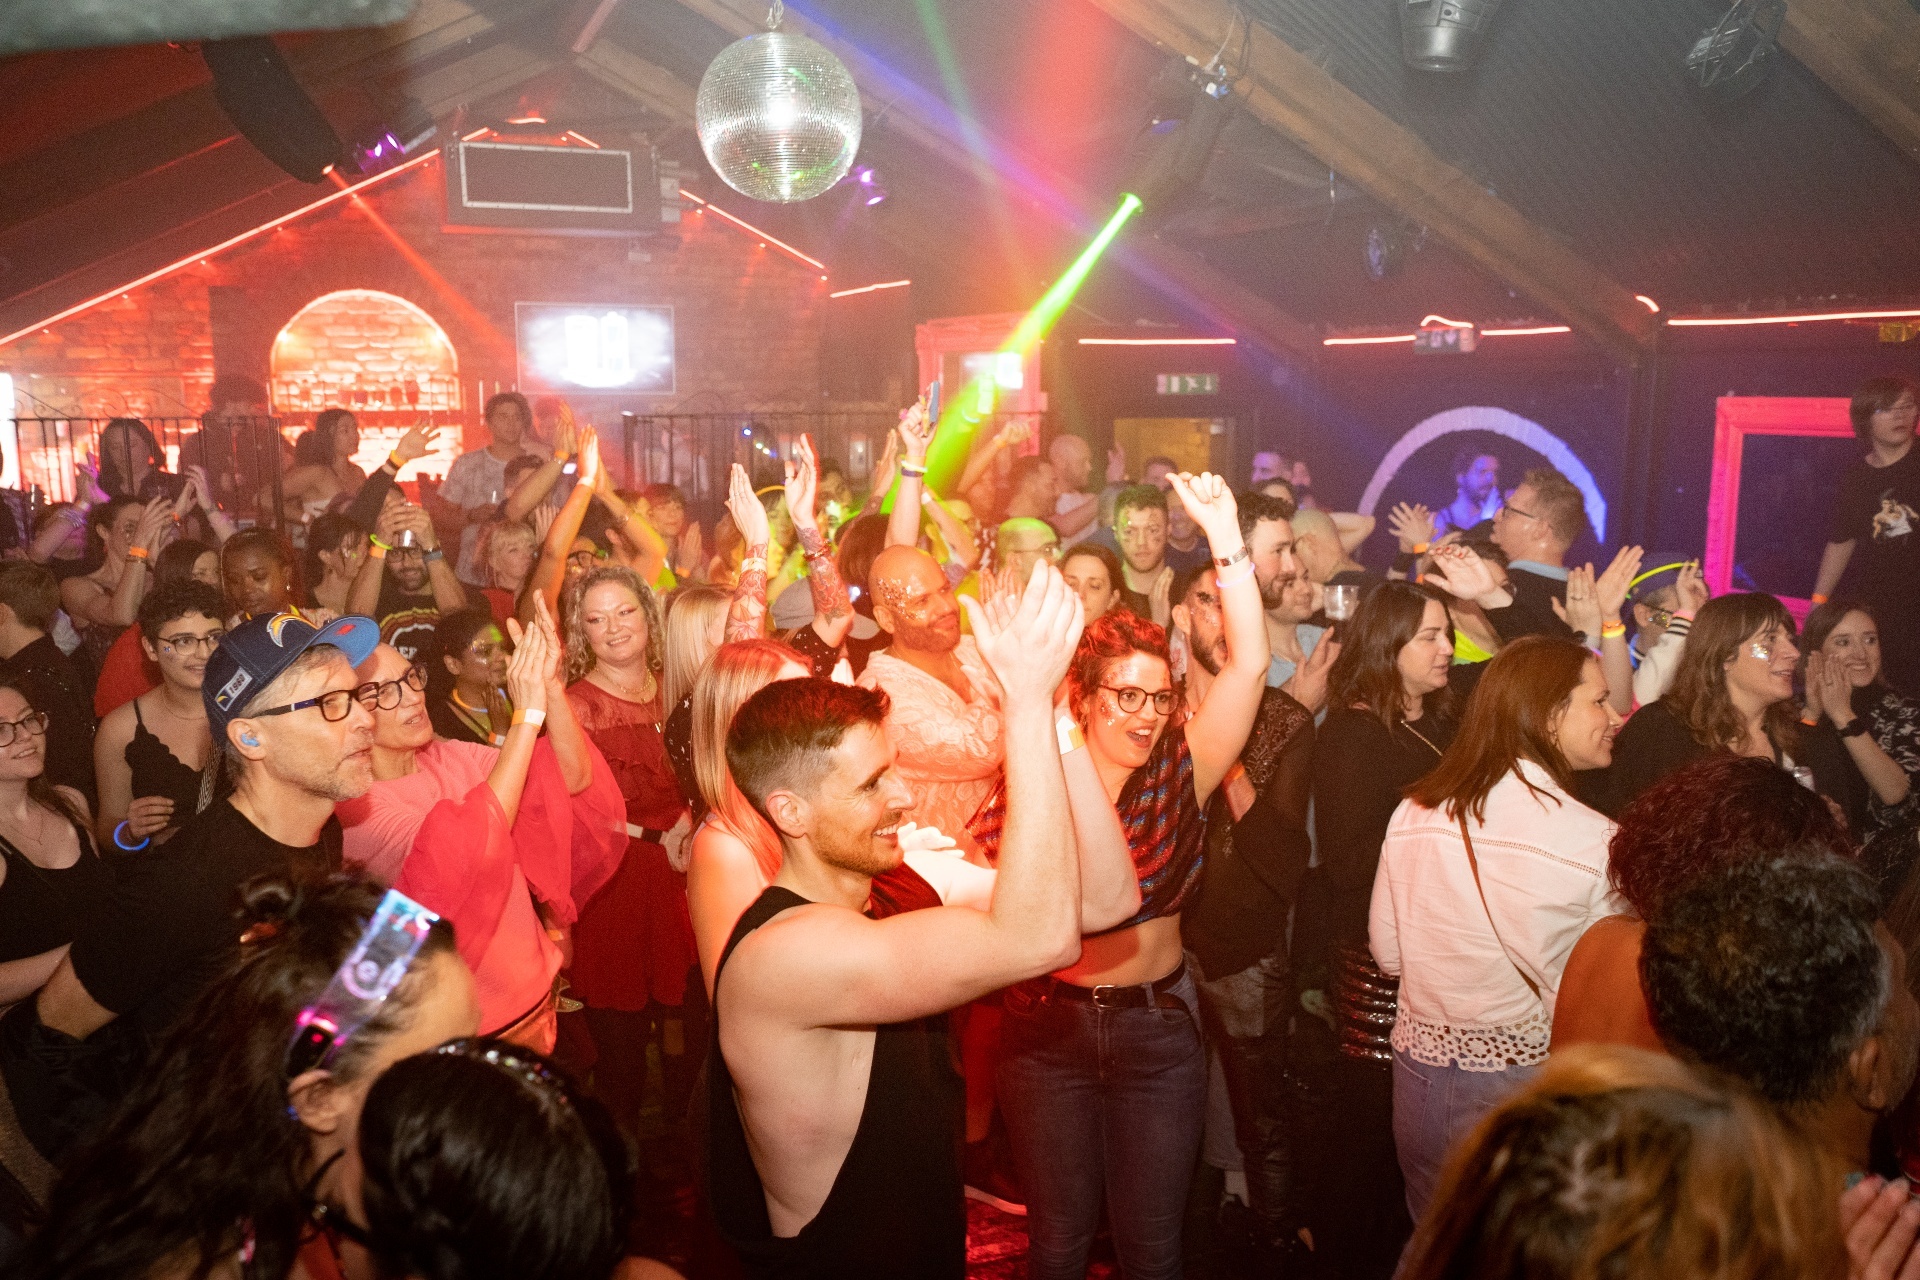 A Night For Mature Ravers at Scandals Bar & Club, London